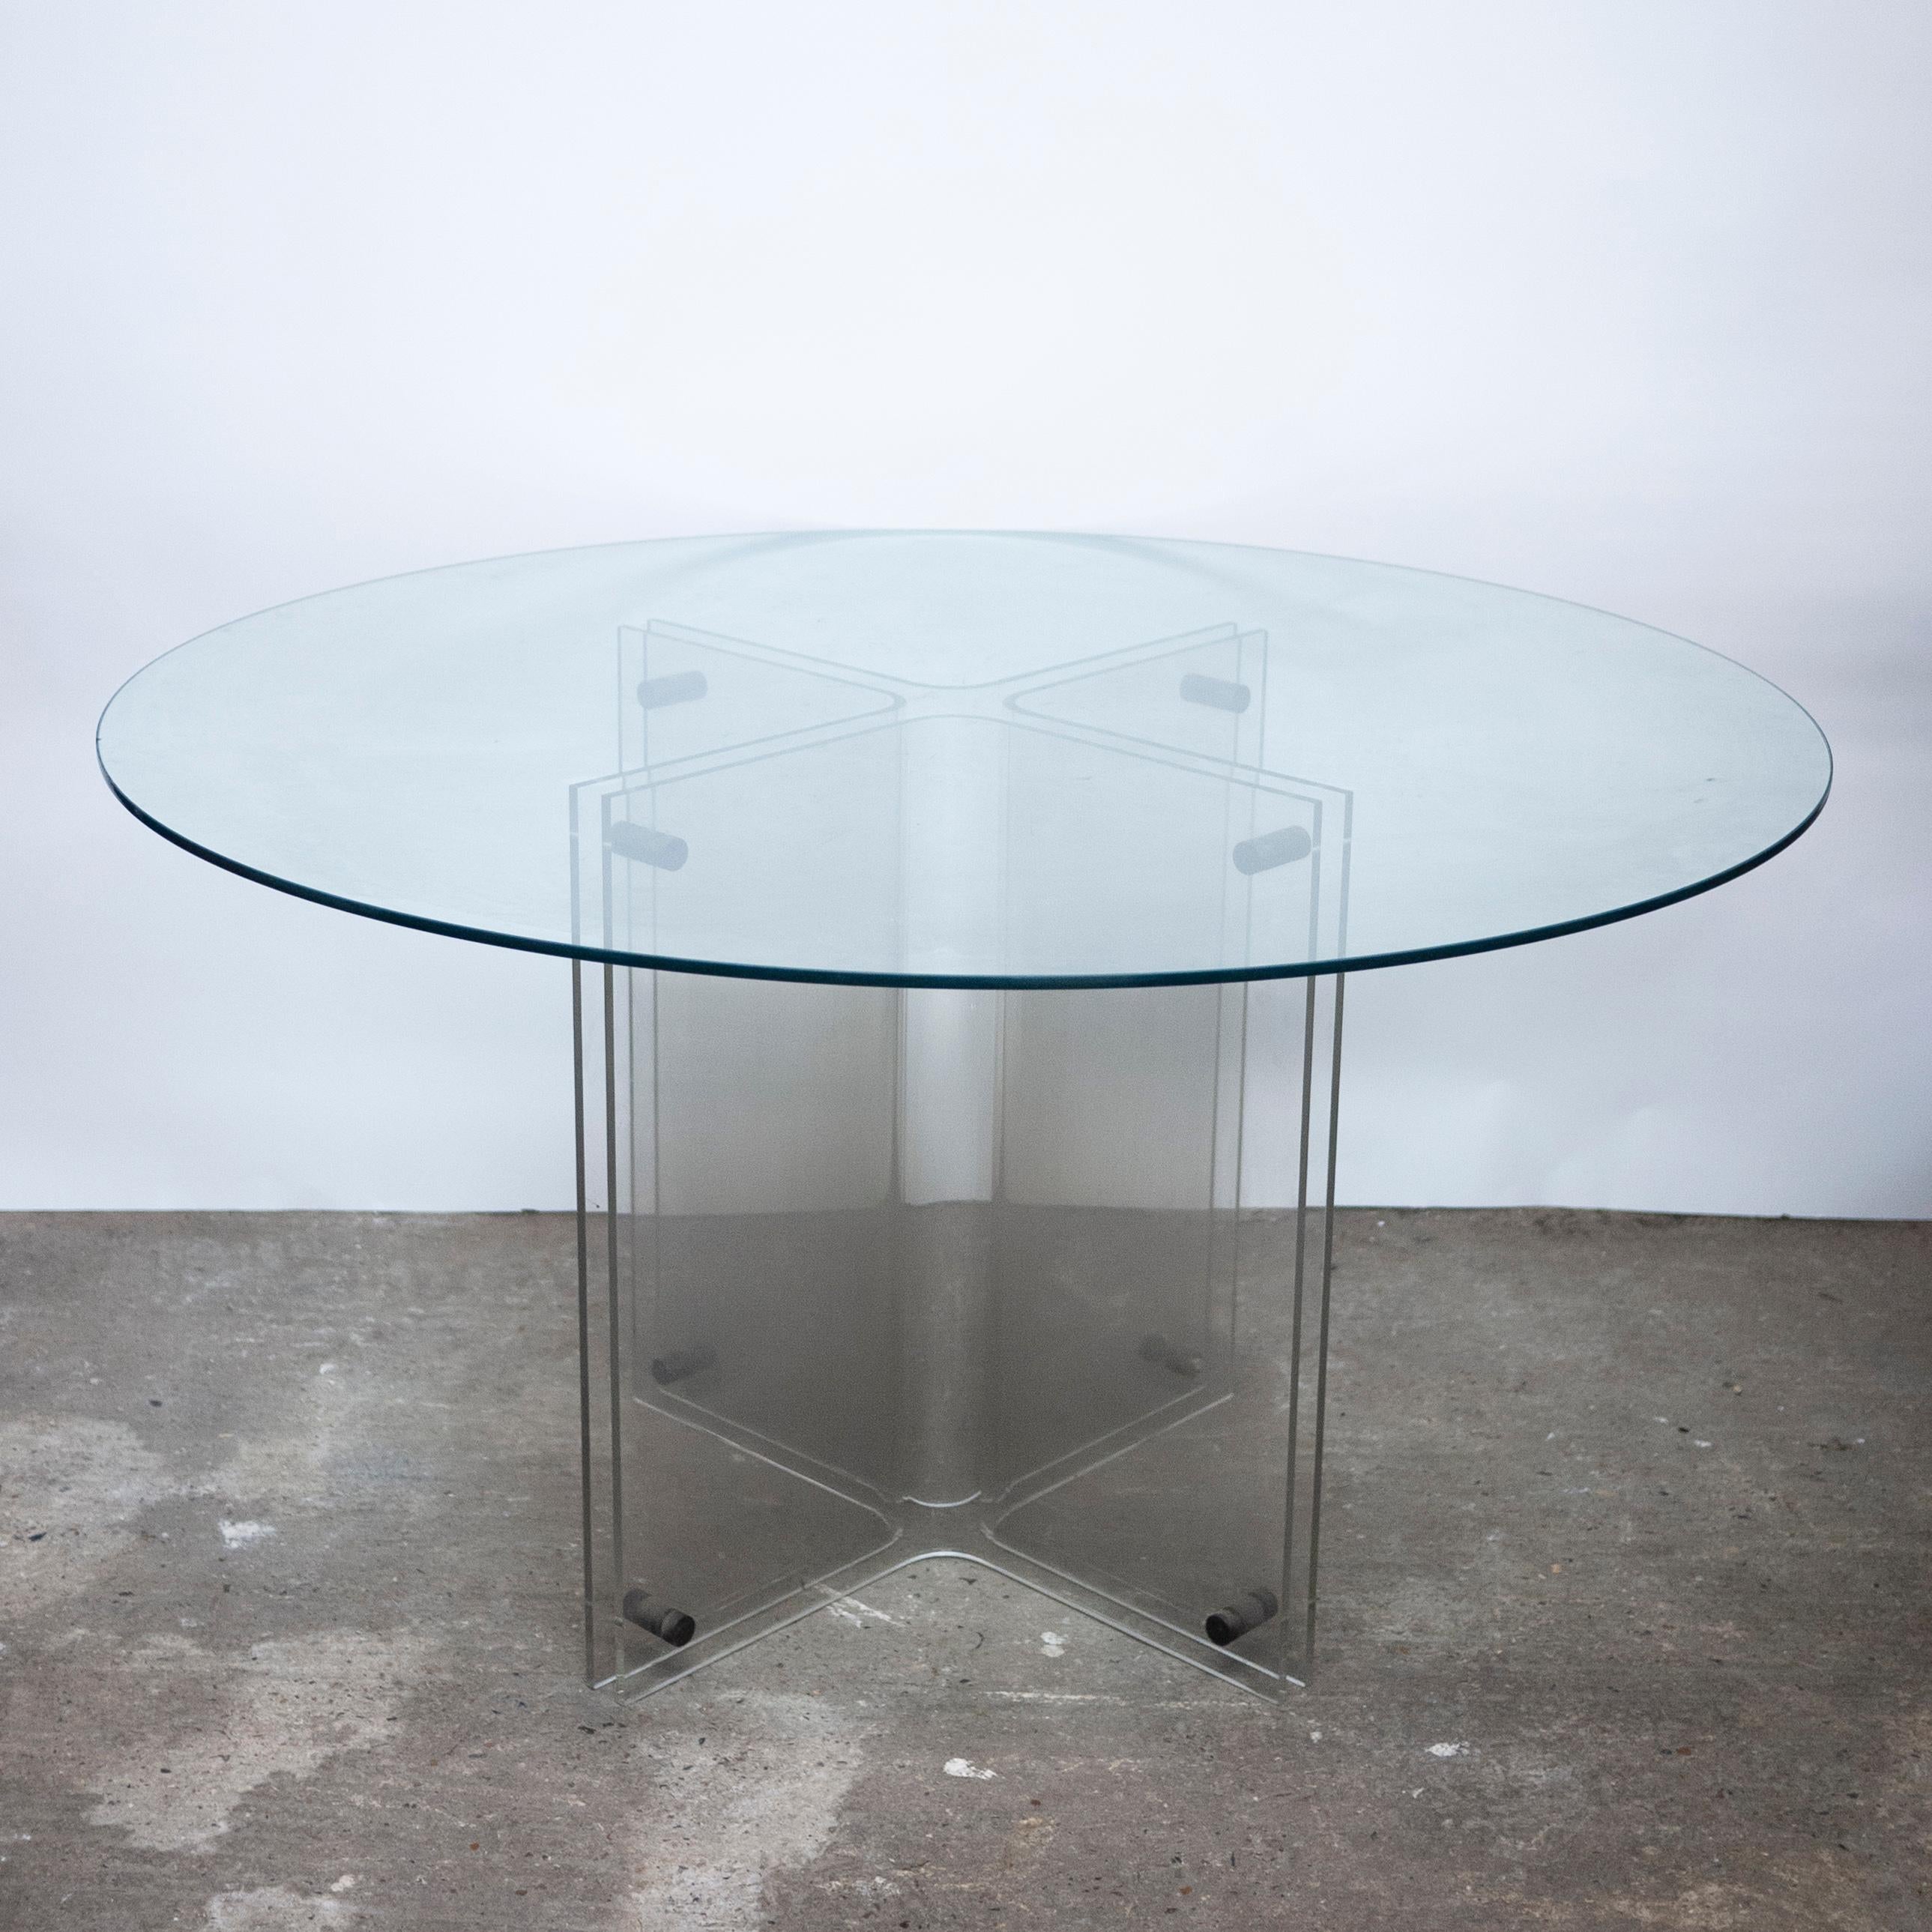 Vintage Hollywood Regency Lucite and Glass Round Dining Table, 1980s For Sale 12